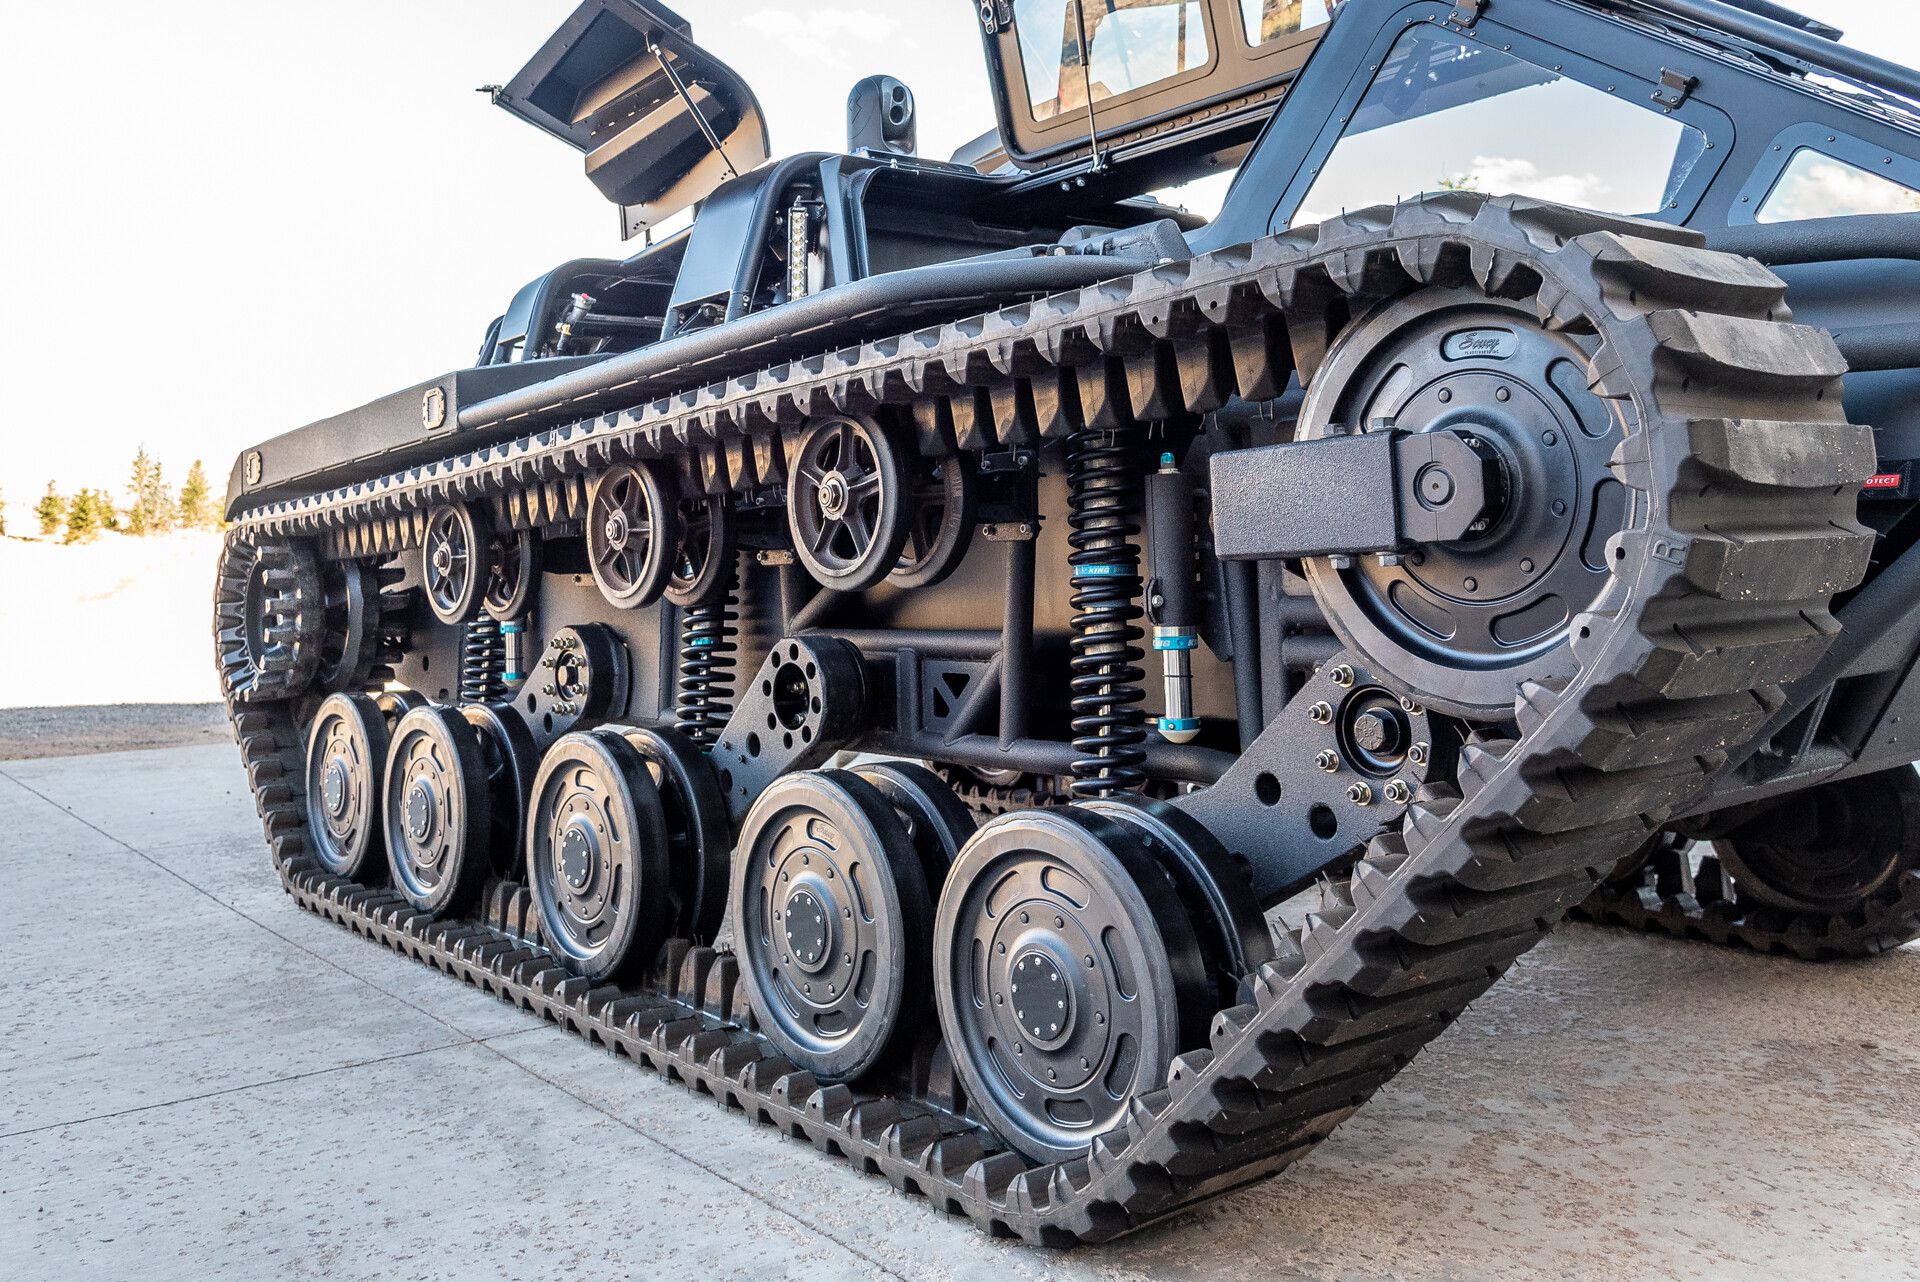 Destroy Your Foes And Everything Else In Your Path With This High-Speed Tracked Vehicle